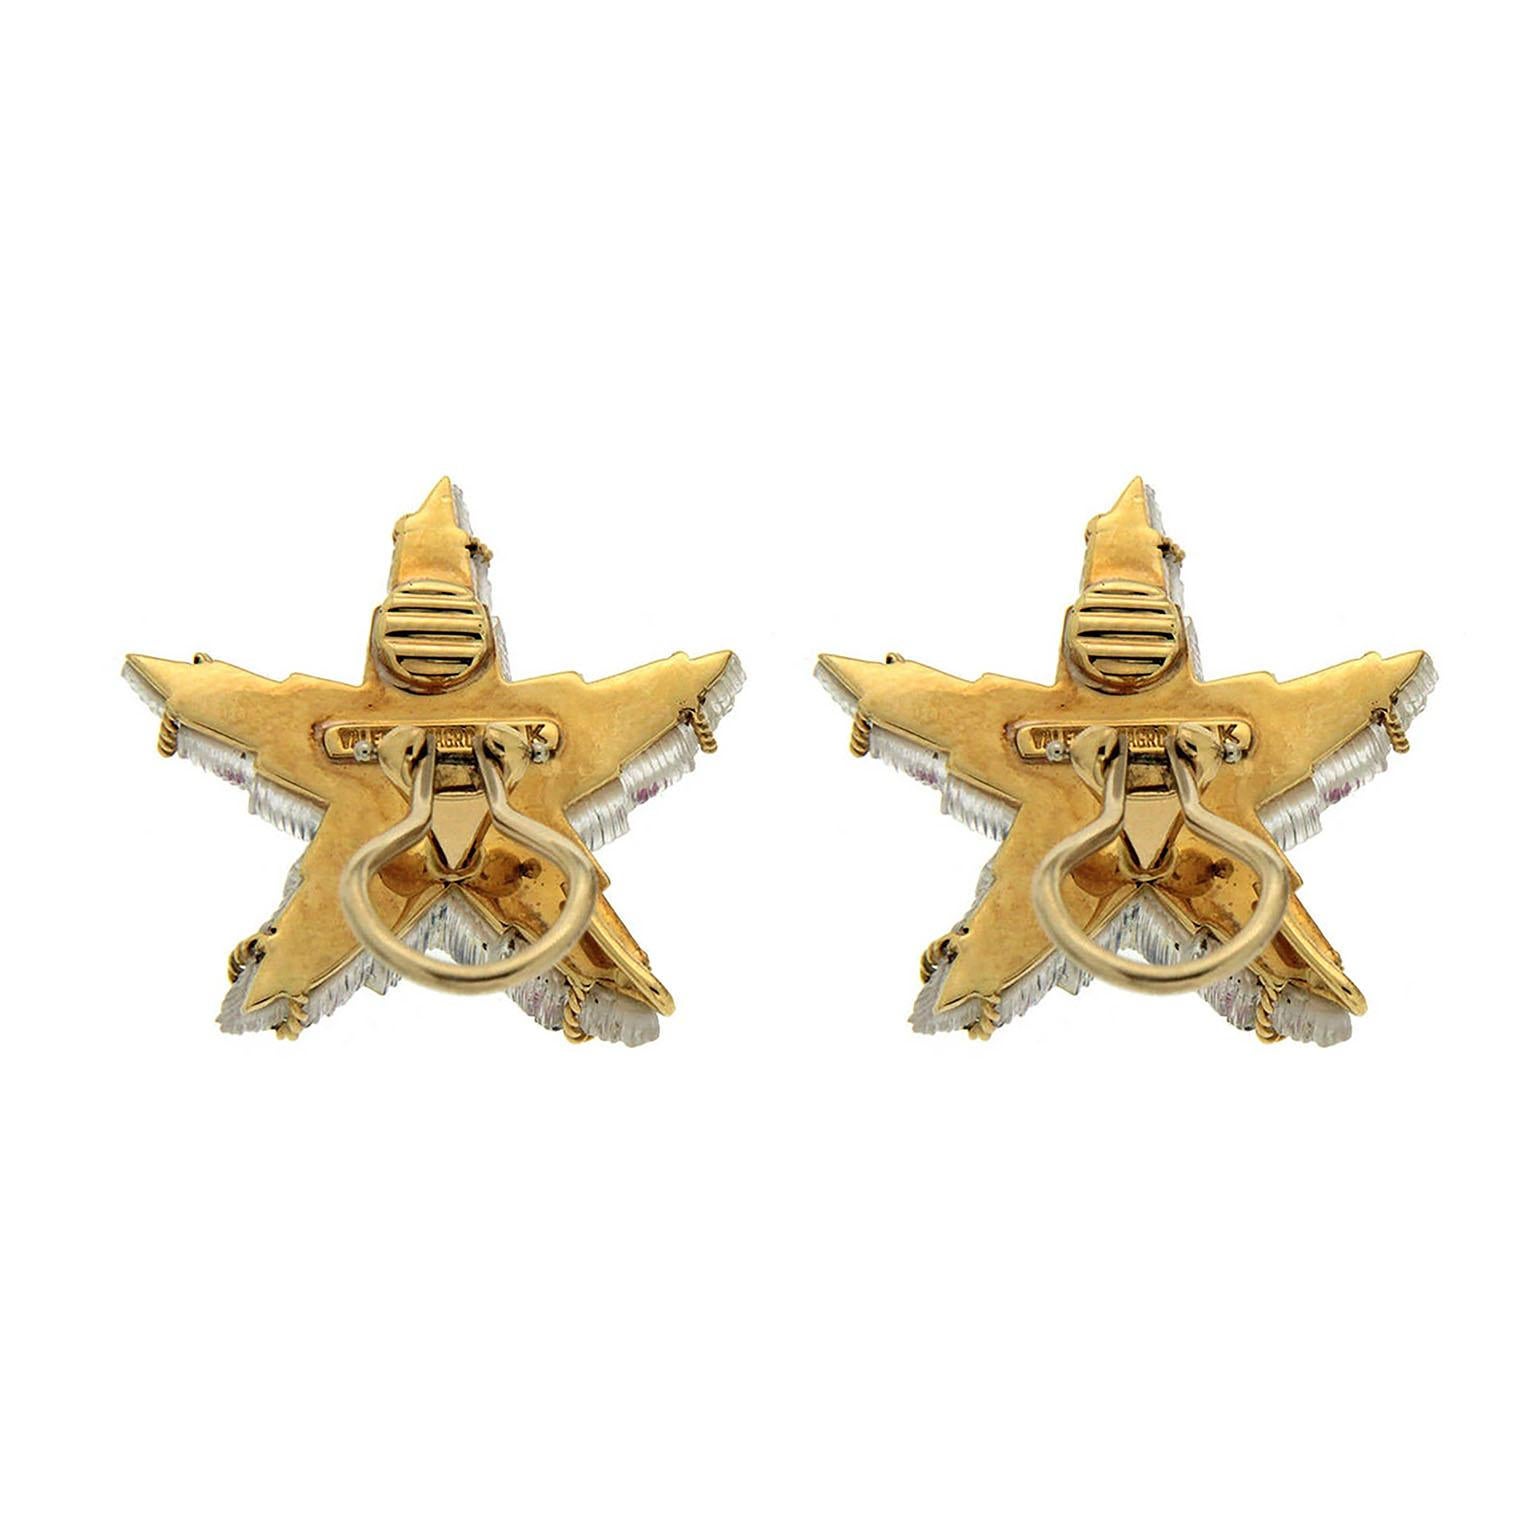 Women's Valentin Magro Crystal Starfish Earrings with Colored Stones